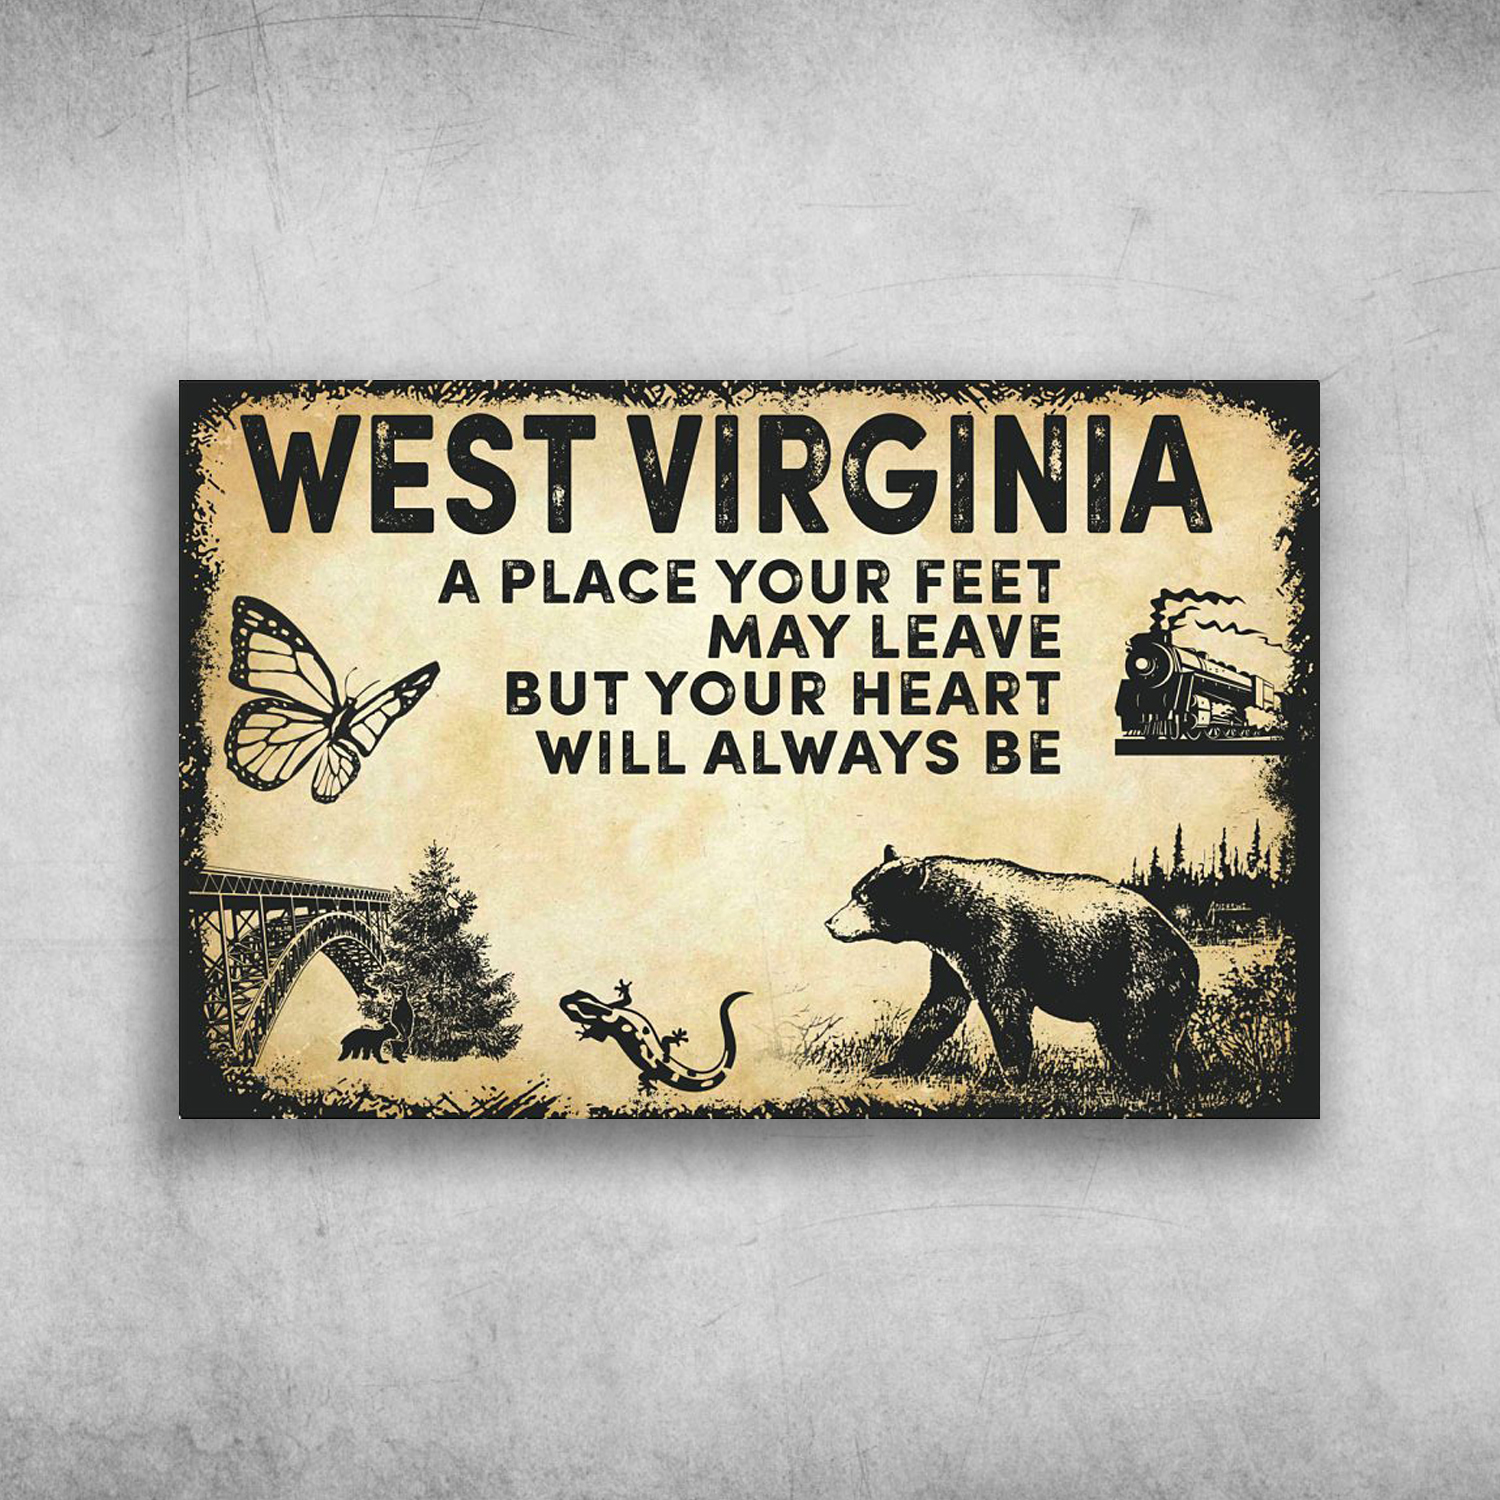 West Virginia America A PLace Your Feet May Leave